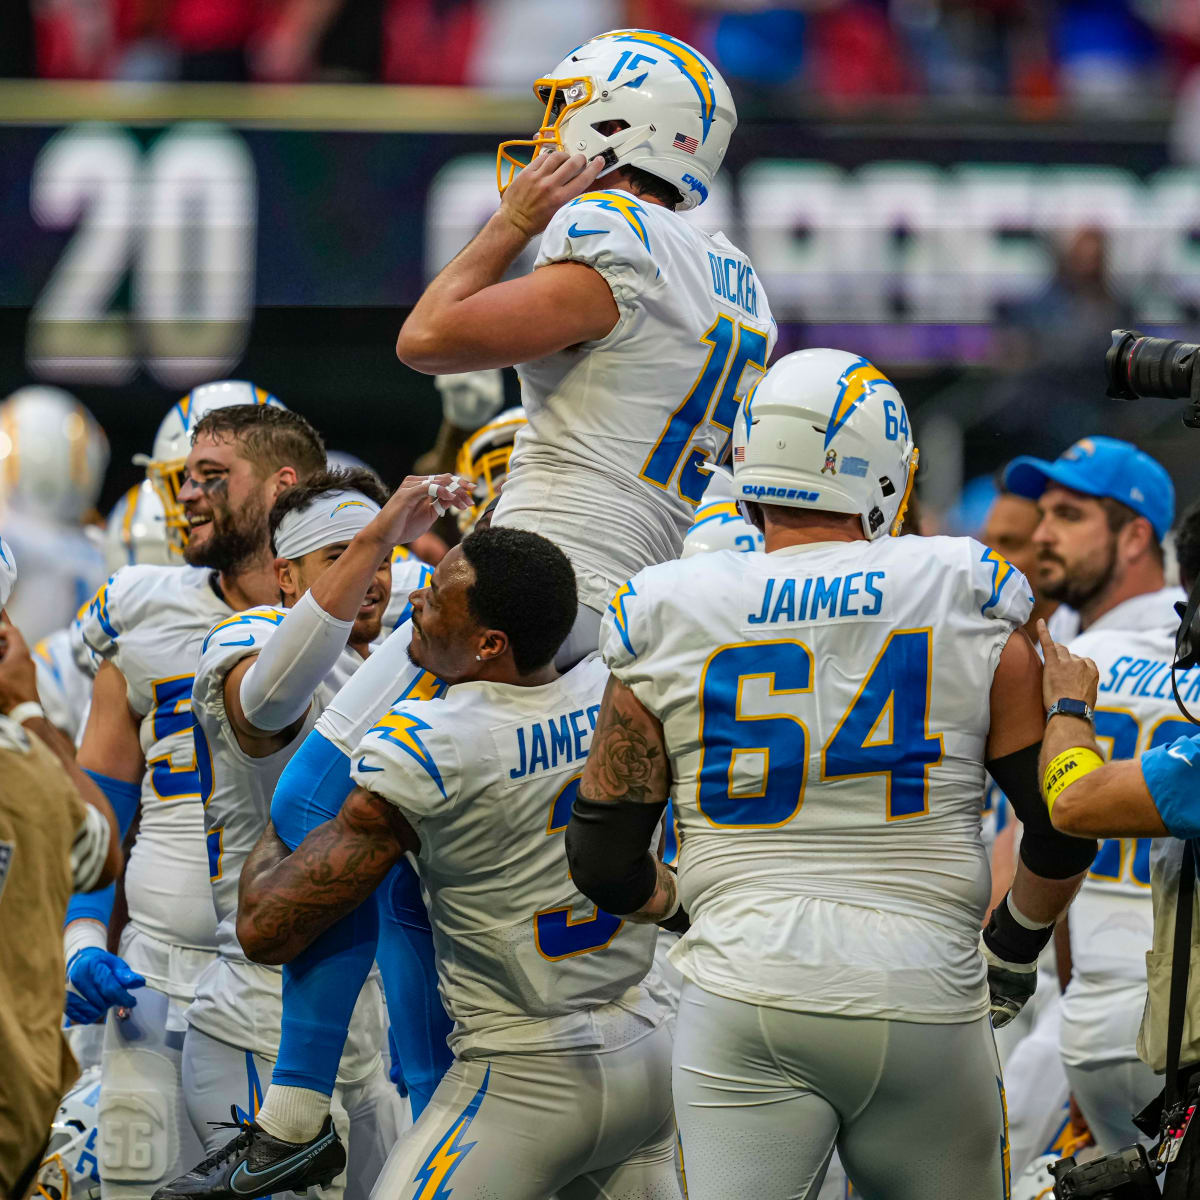 Dicker's FG propels Chargers to 17-14 victory over Titans